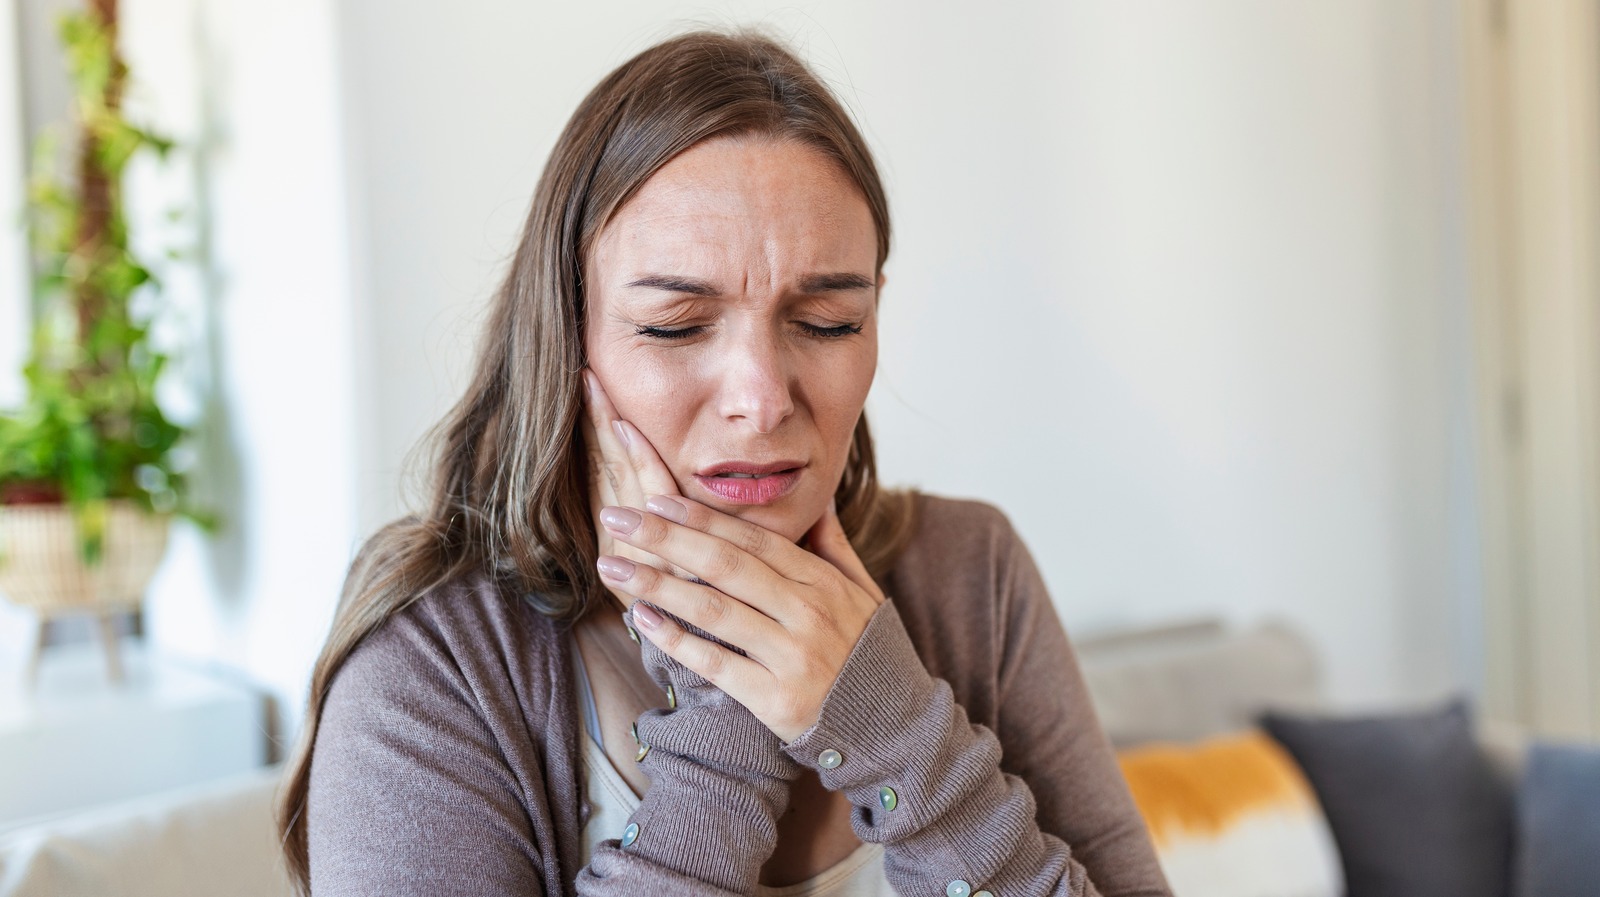 Signs The Sore In Your Mouth Needs Medical Attention - Health Digest